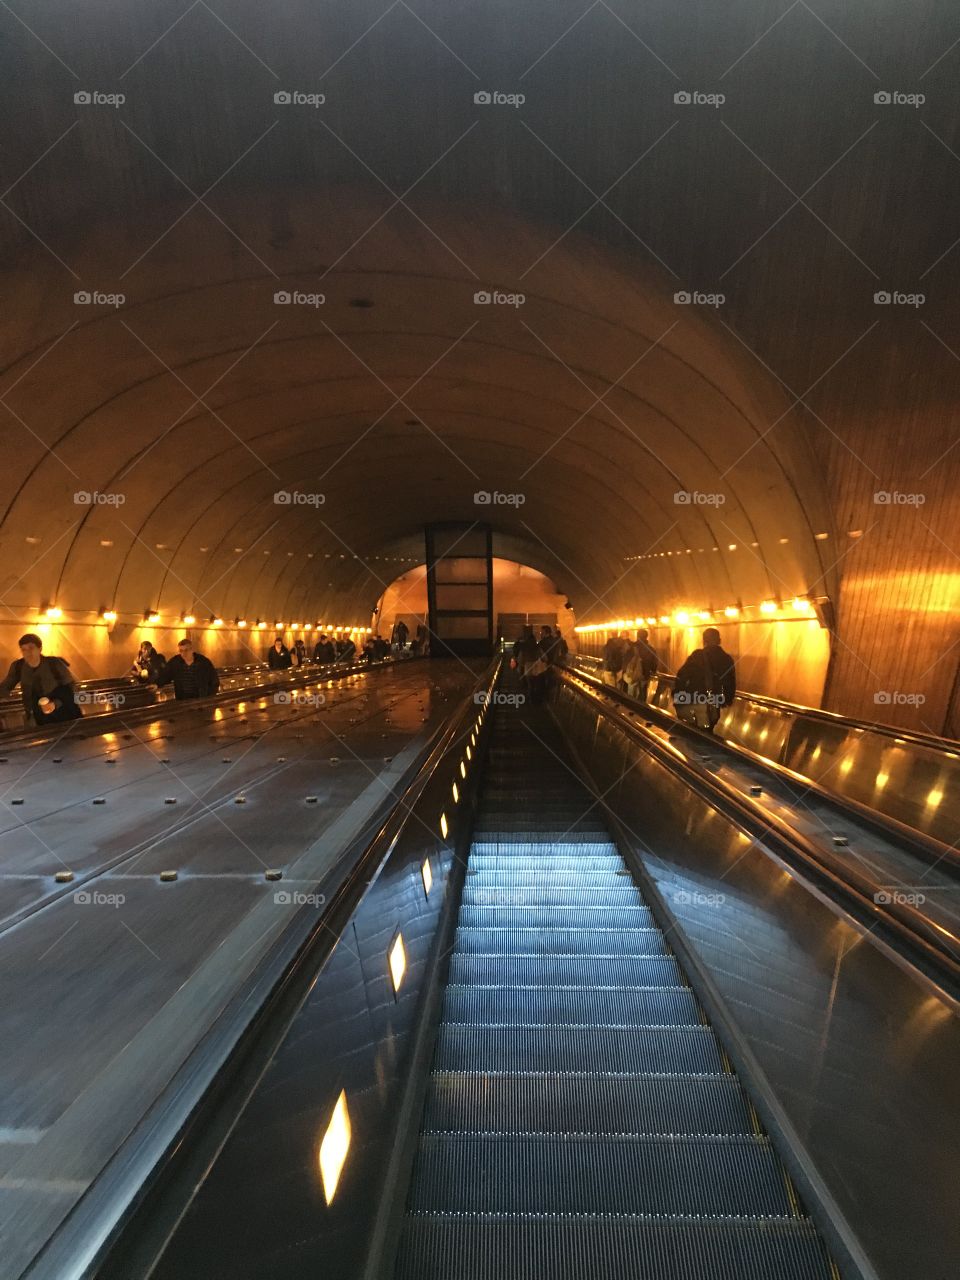 One of the longest escalators in the world!